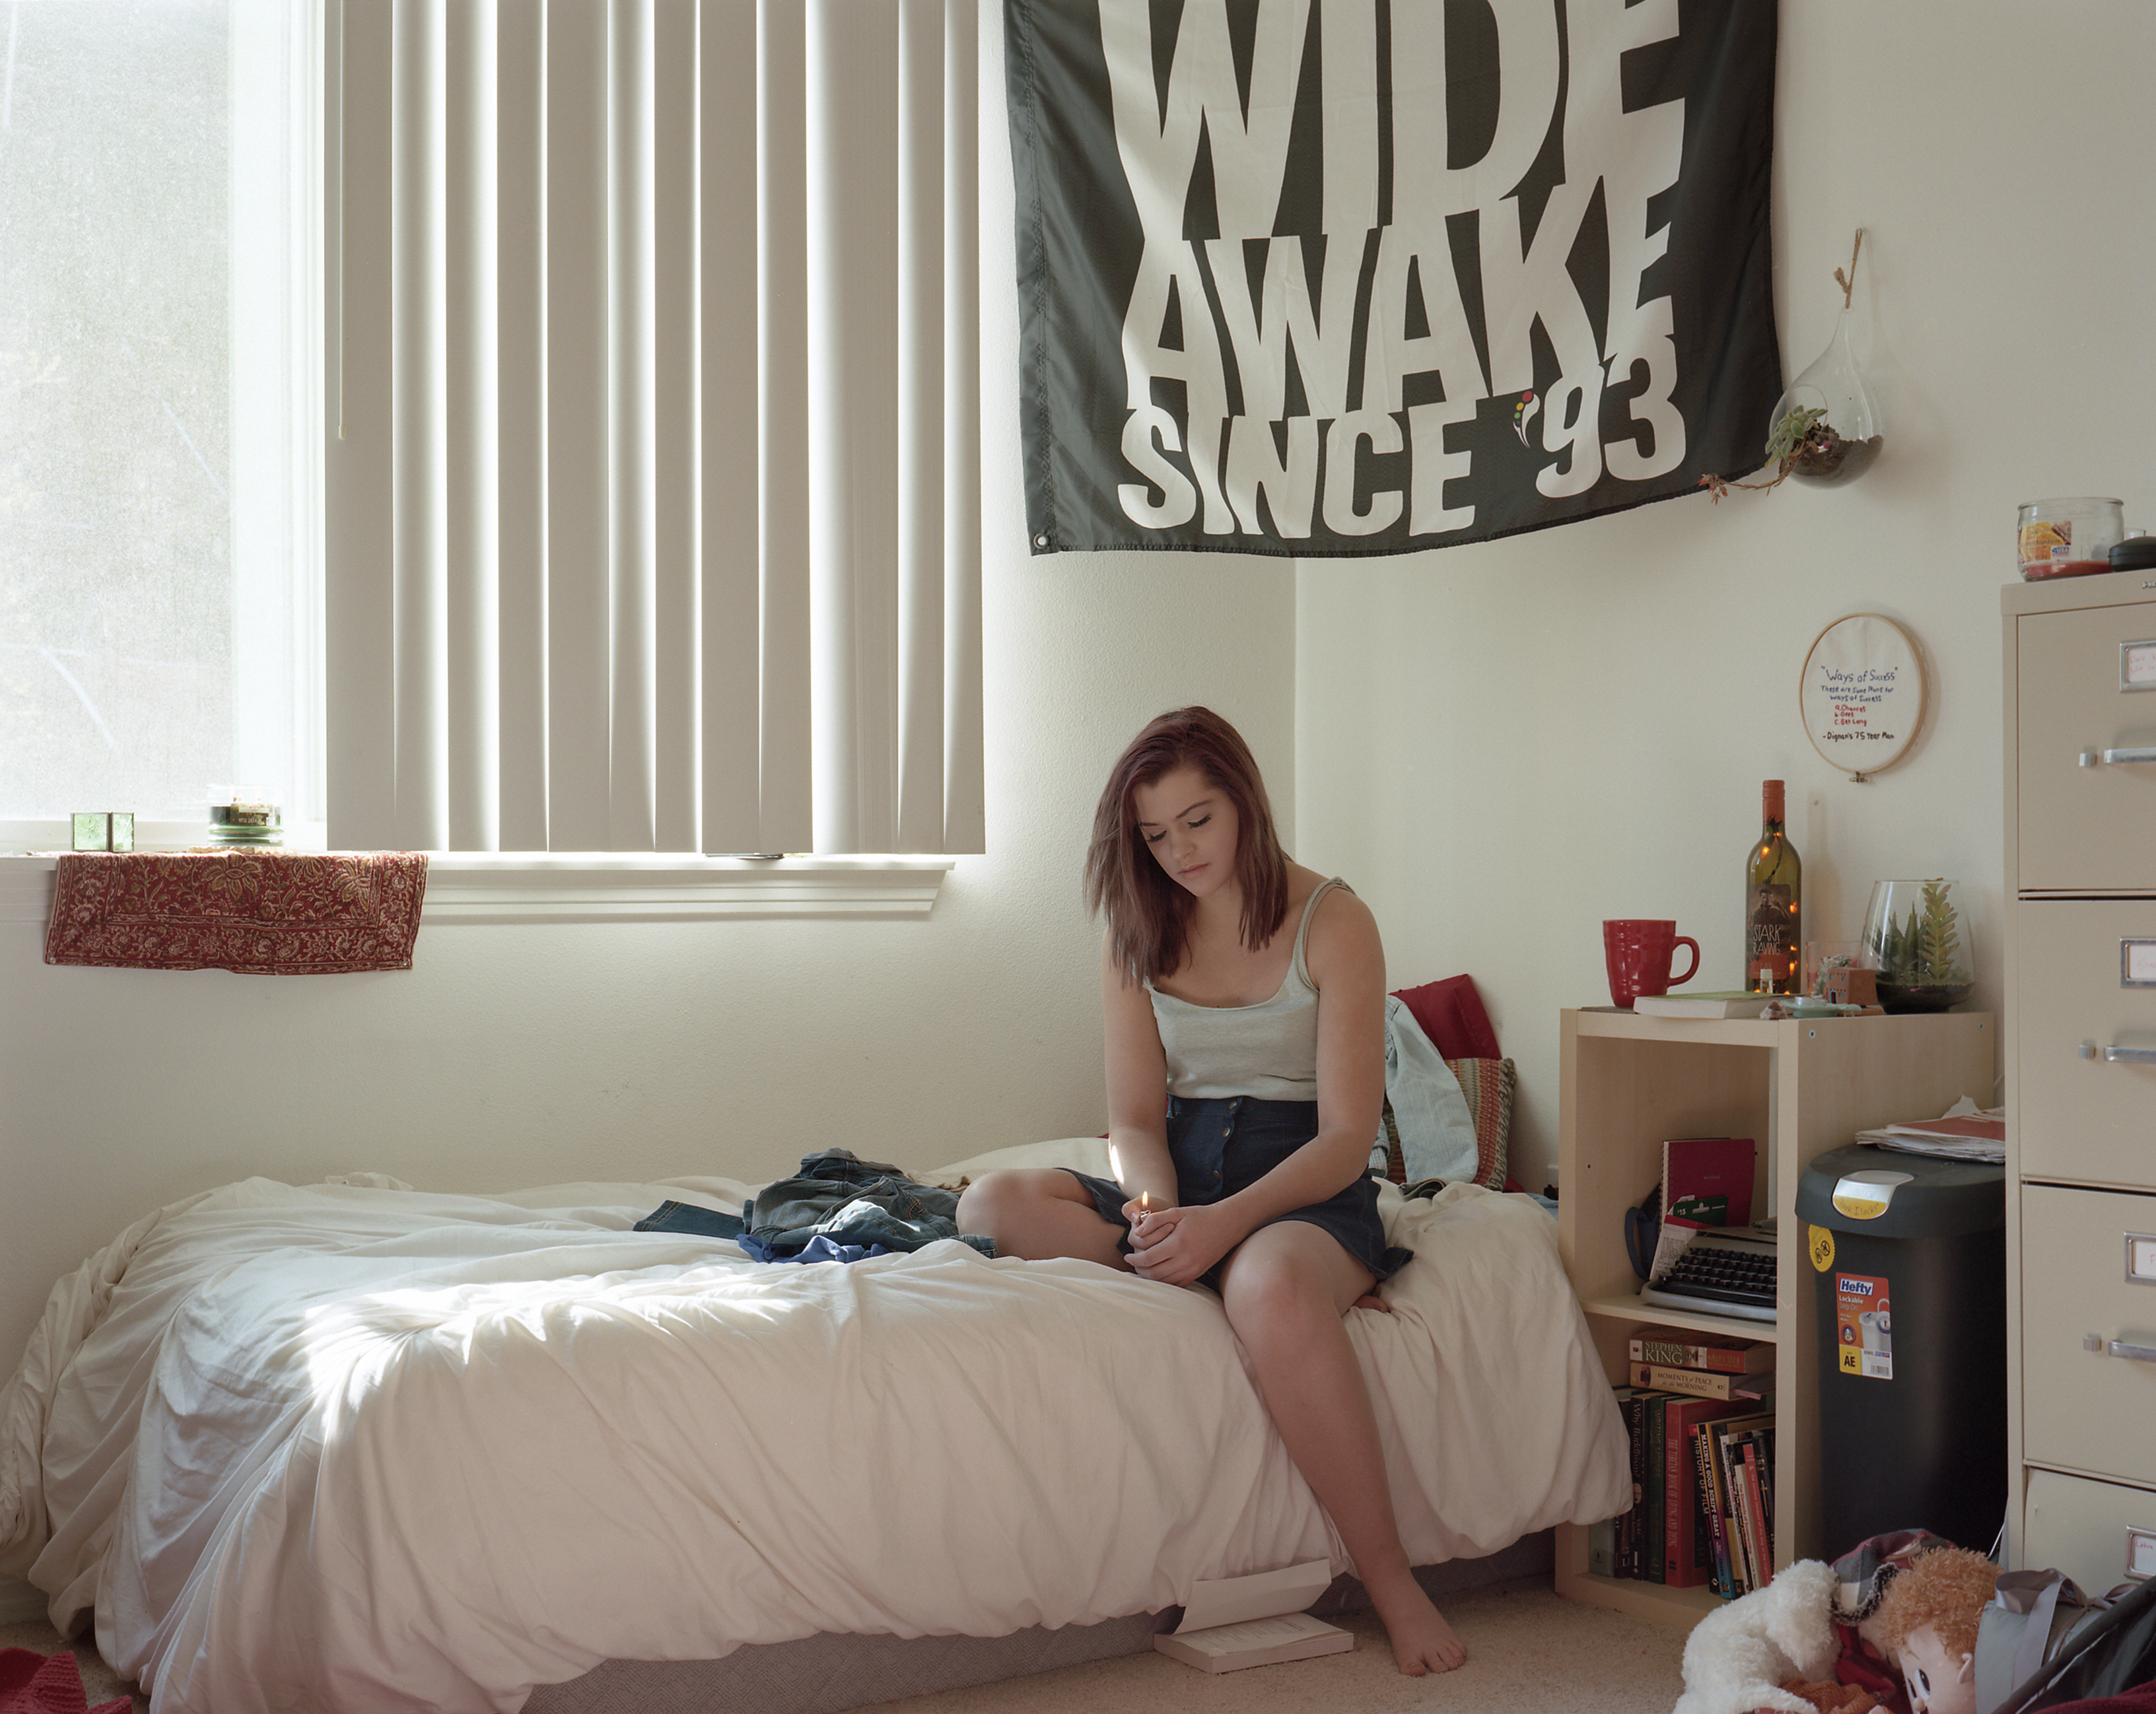 Faith-Ann Bishop, 20, had severe depression in high school. Now she’s a film student in L.A. (Lise Sarfati for TIME)